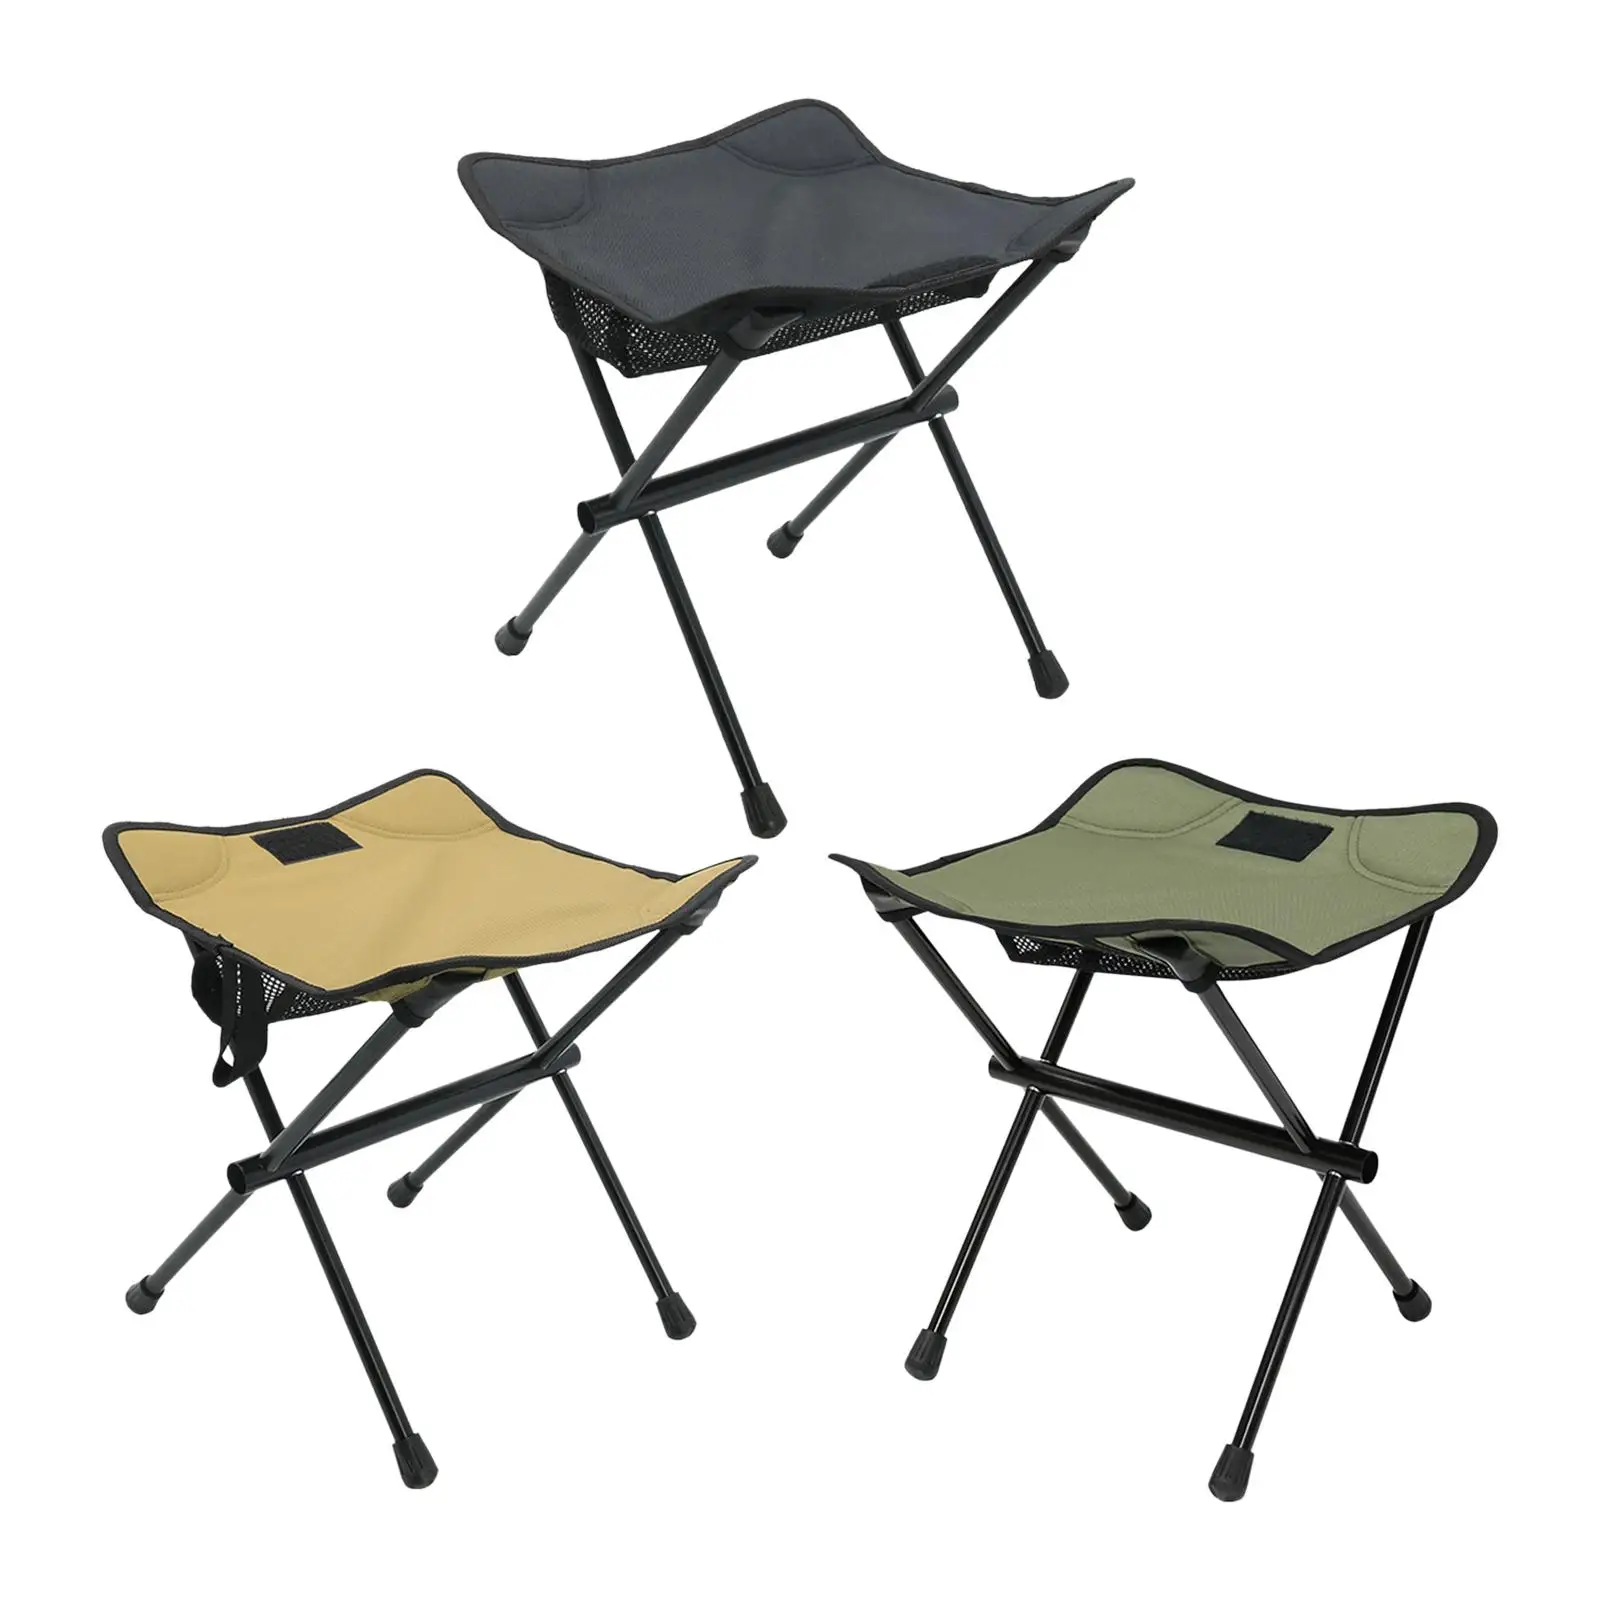 Camping Folding Stool Portable Footrest Saddle Chair for Picnic Fishing BBQ